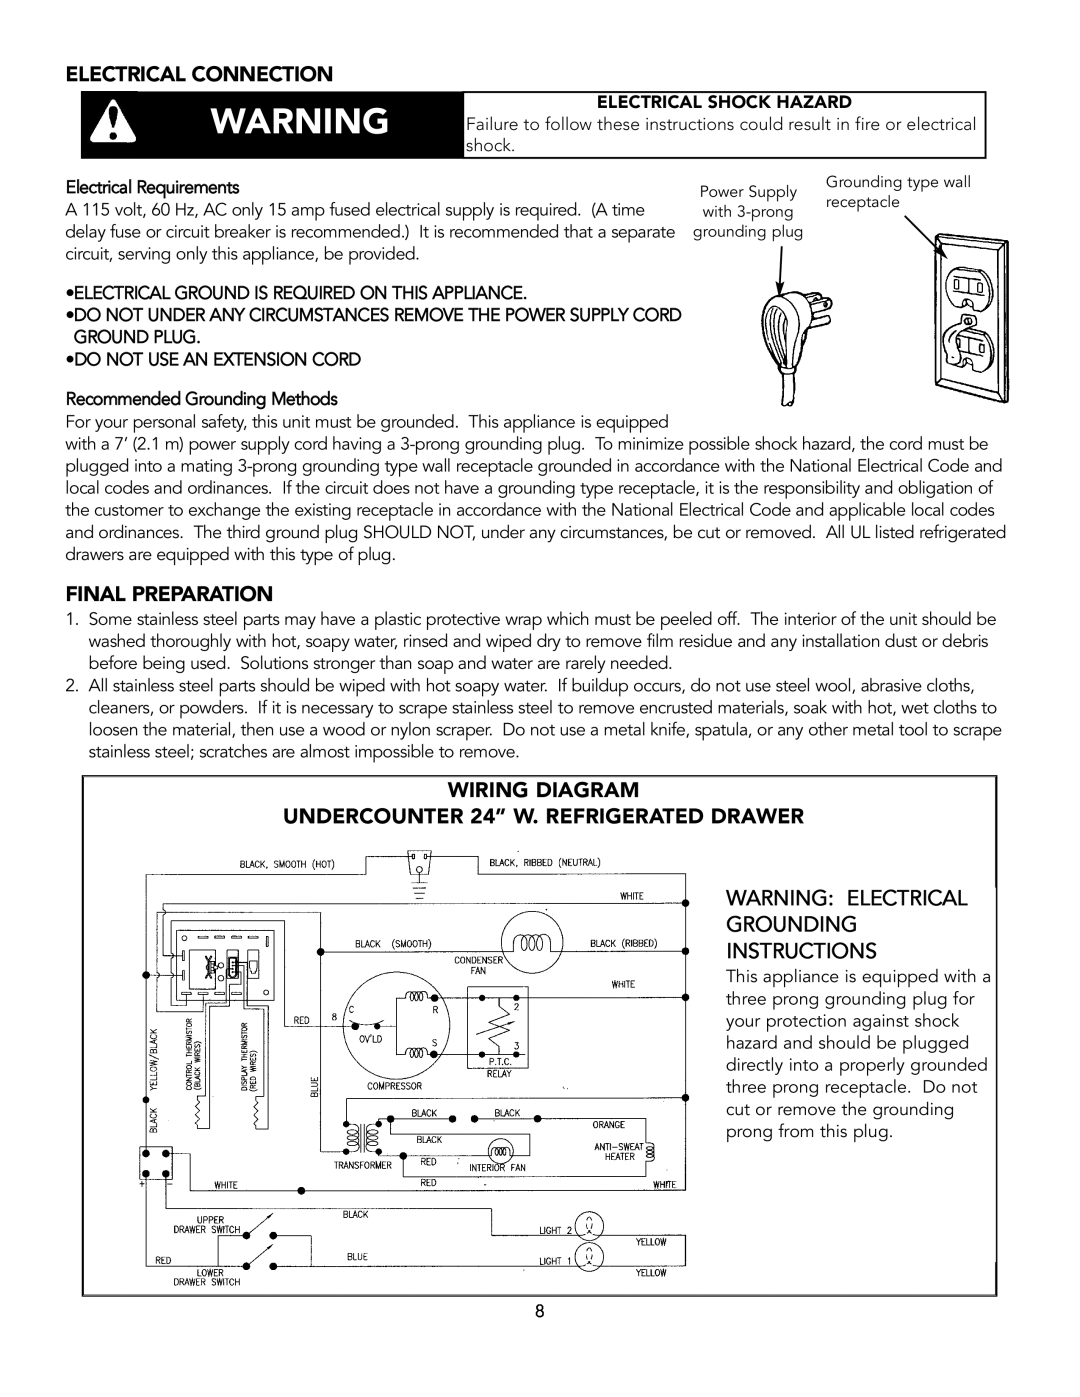 Viking Refrigerator Drawer manual Electrical Connection, Final Preparation, Warning Electrical Grounding Instructions 